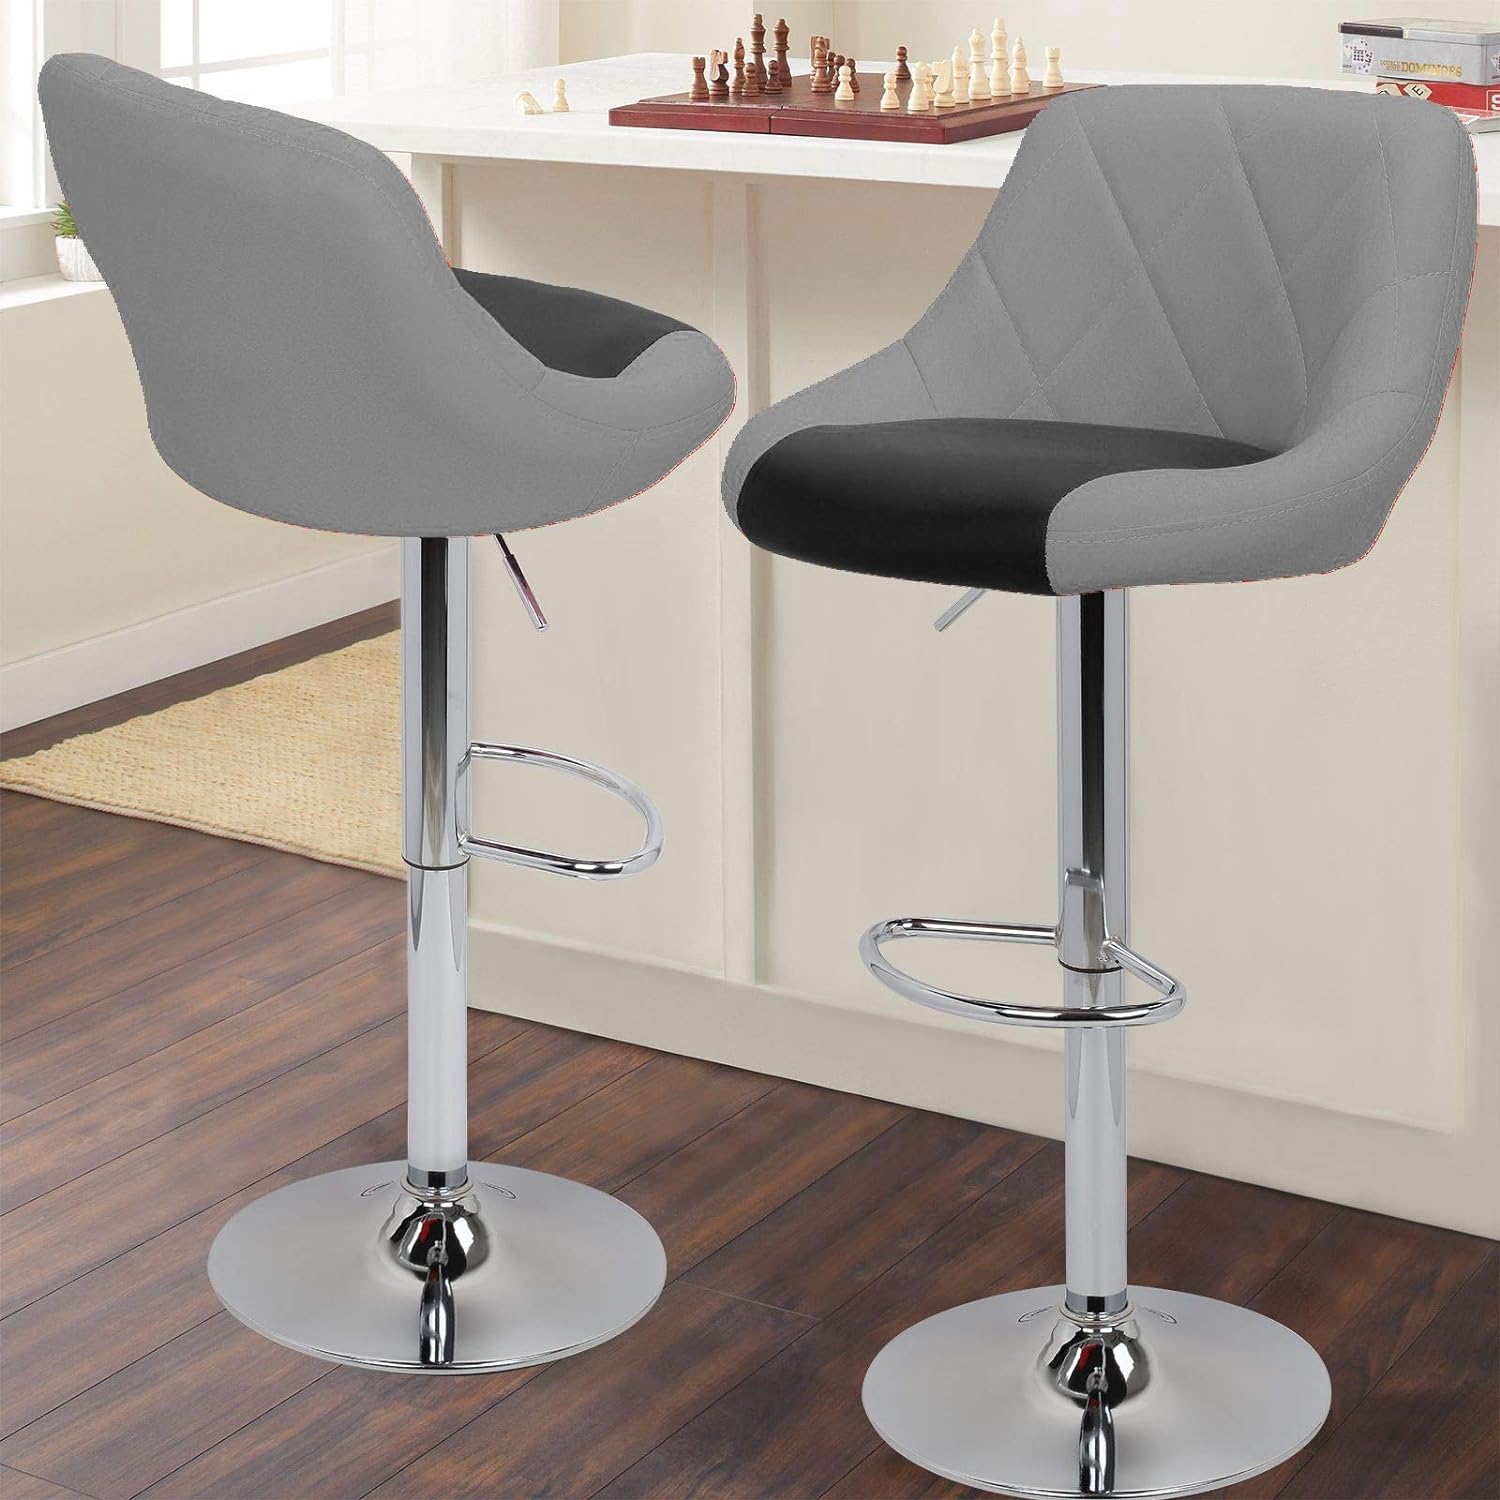 Stylish Bar Stools With Backrests For Comfort